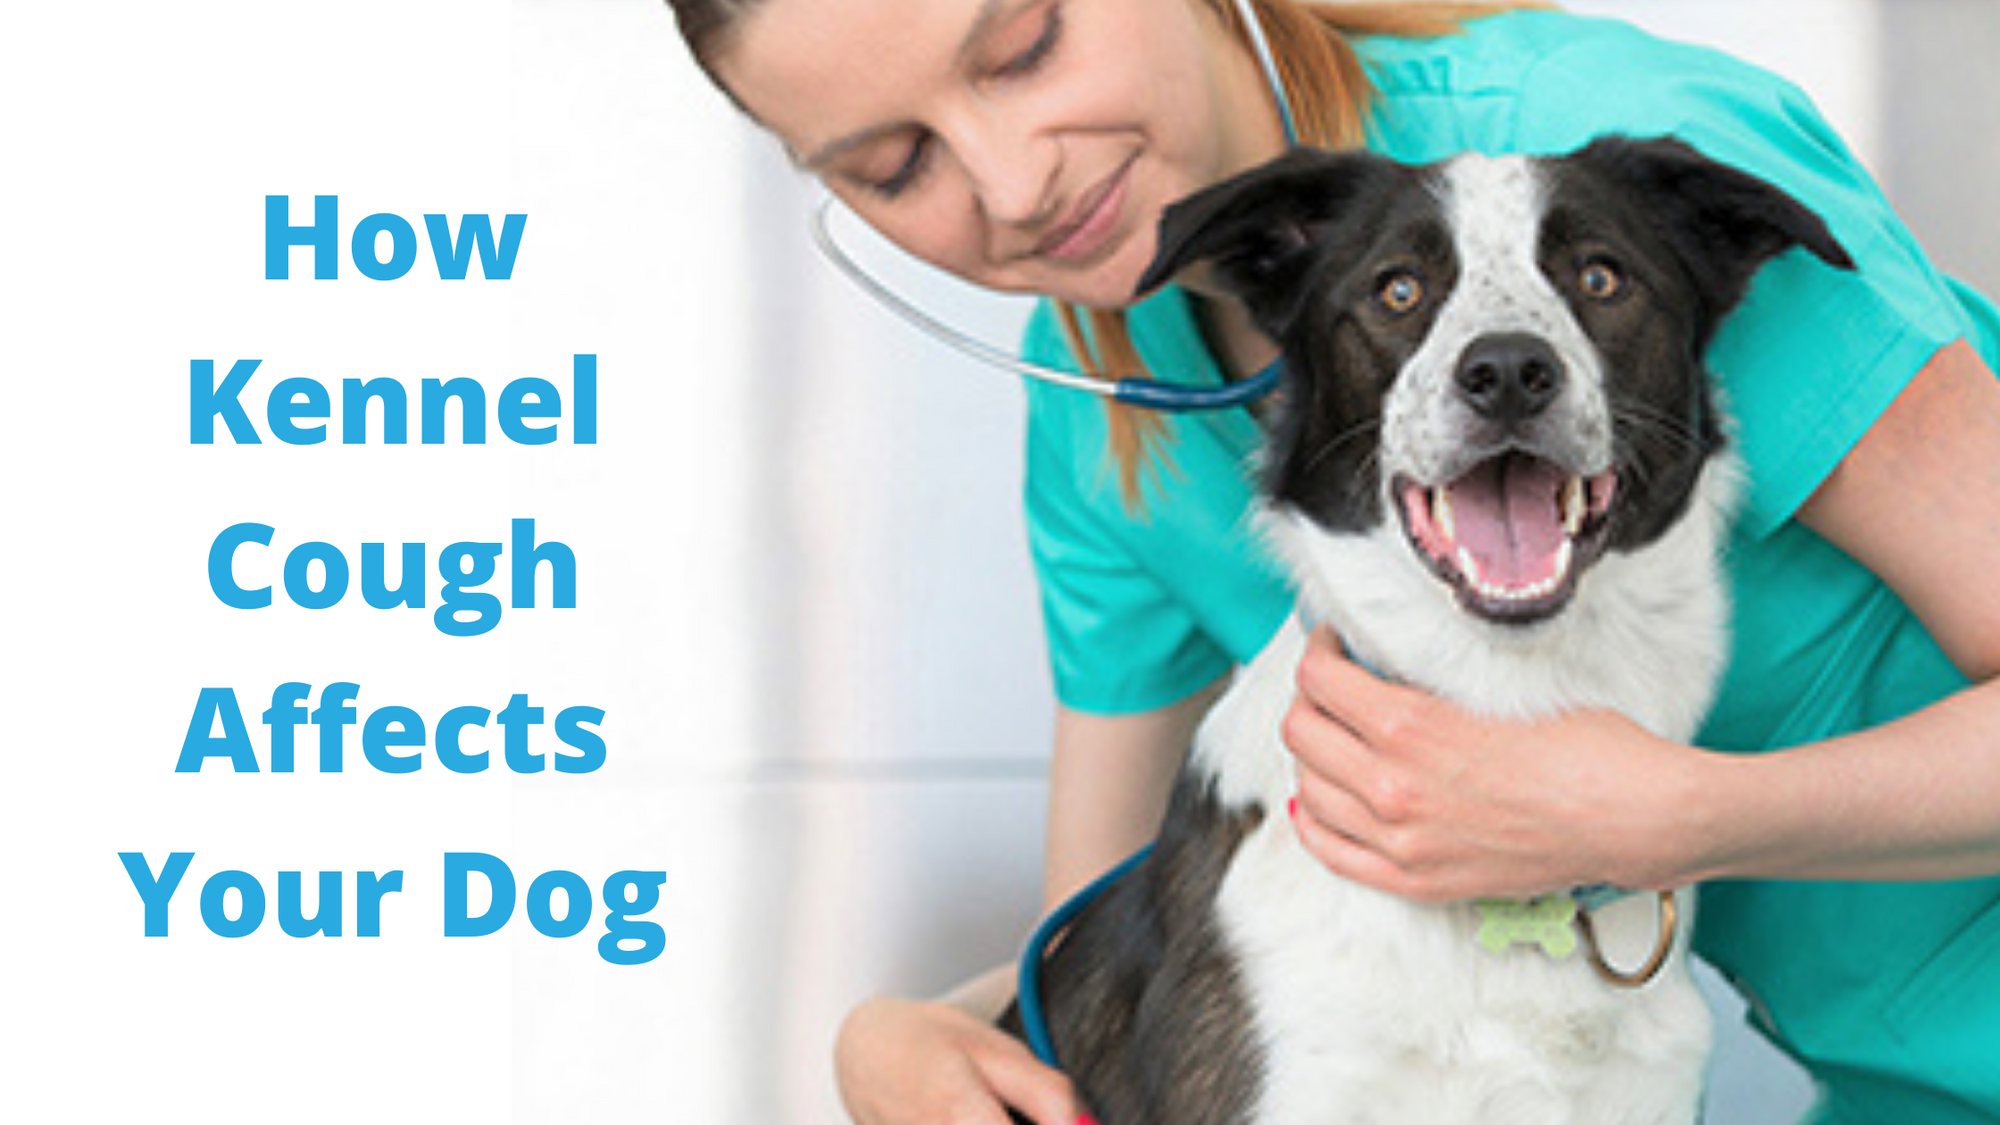 How Kennel Cough Affects Your Dog